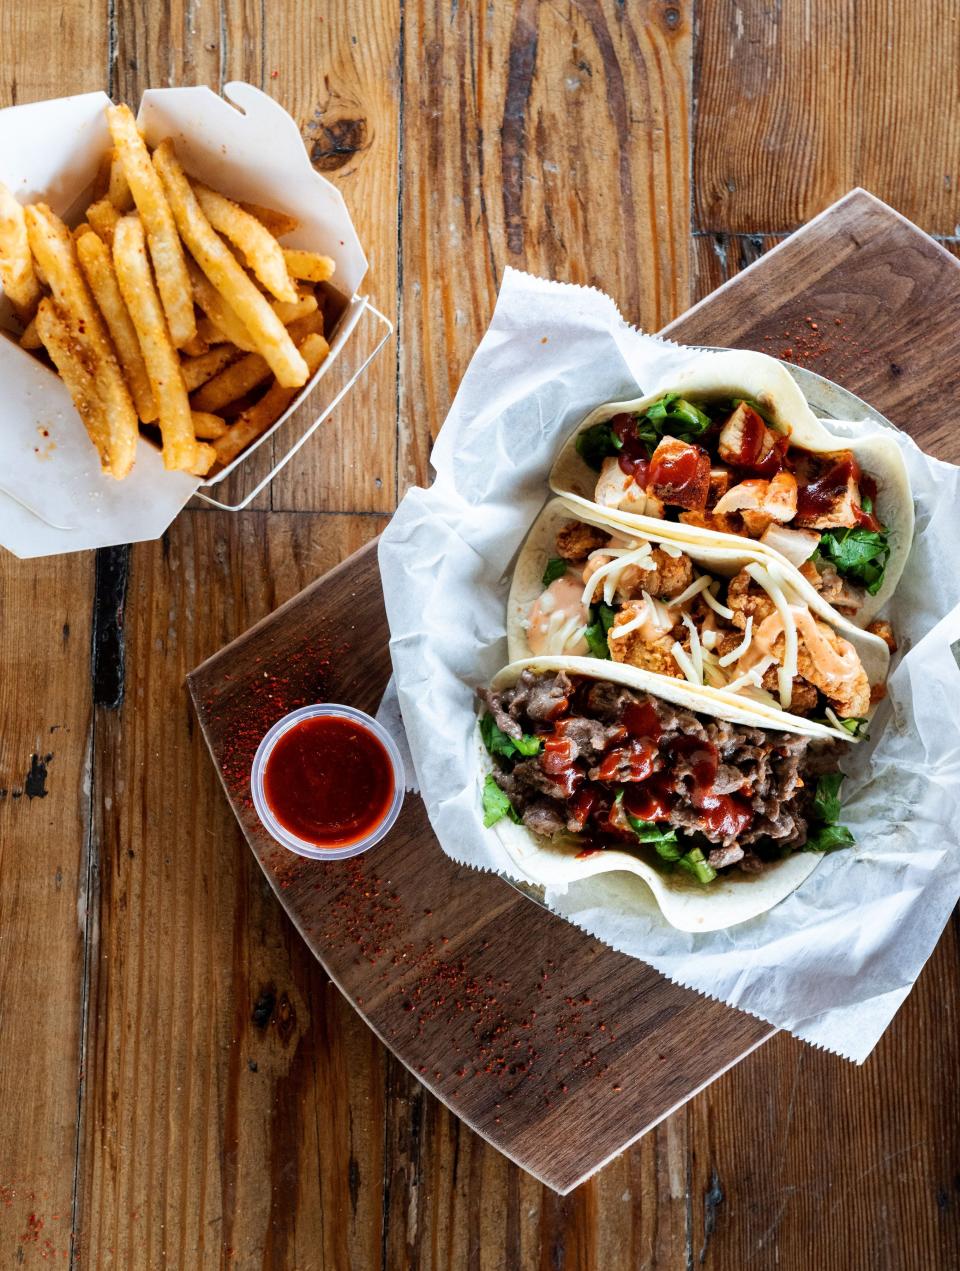 Tomas Lee's specialty tacos including the 'Korean Fried Chicken Taco' he displayed Thursday morning on Good Morning America's 'United States of Taco' competition.